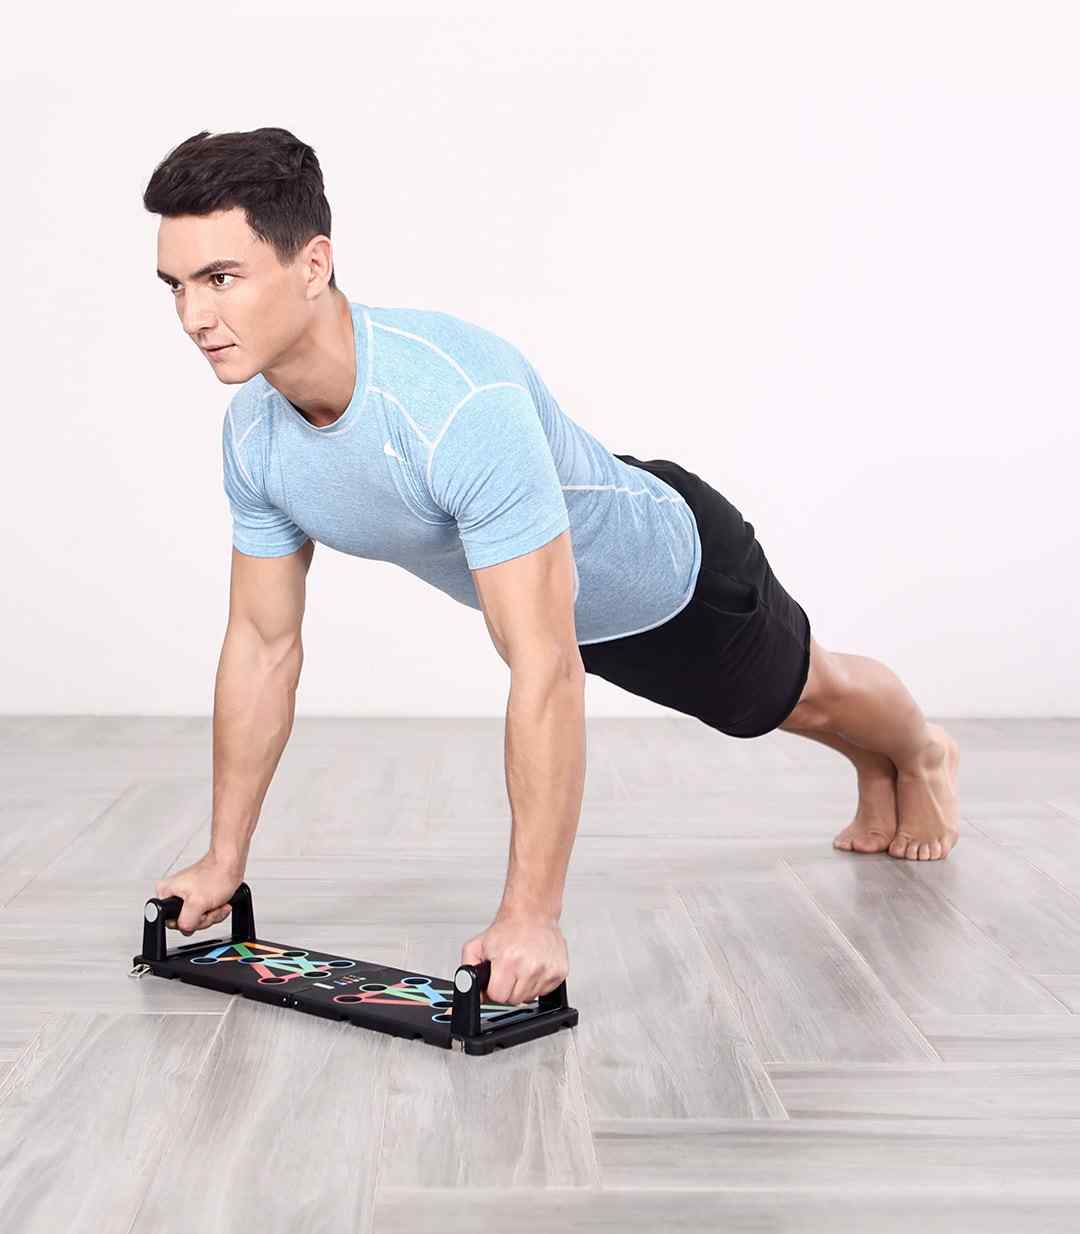 YUNMAI-Protable-Push-up-Support-Board-Training-System-Power-Press-Push-Up-Stands-Exercise-Tools-from-1445684